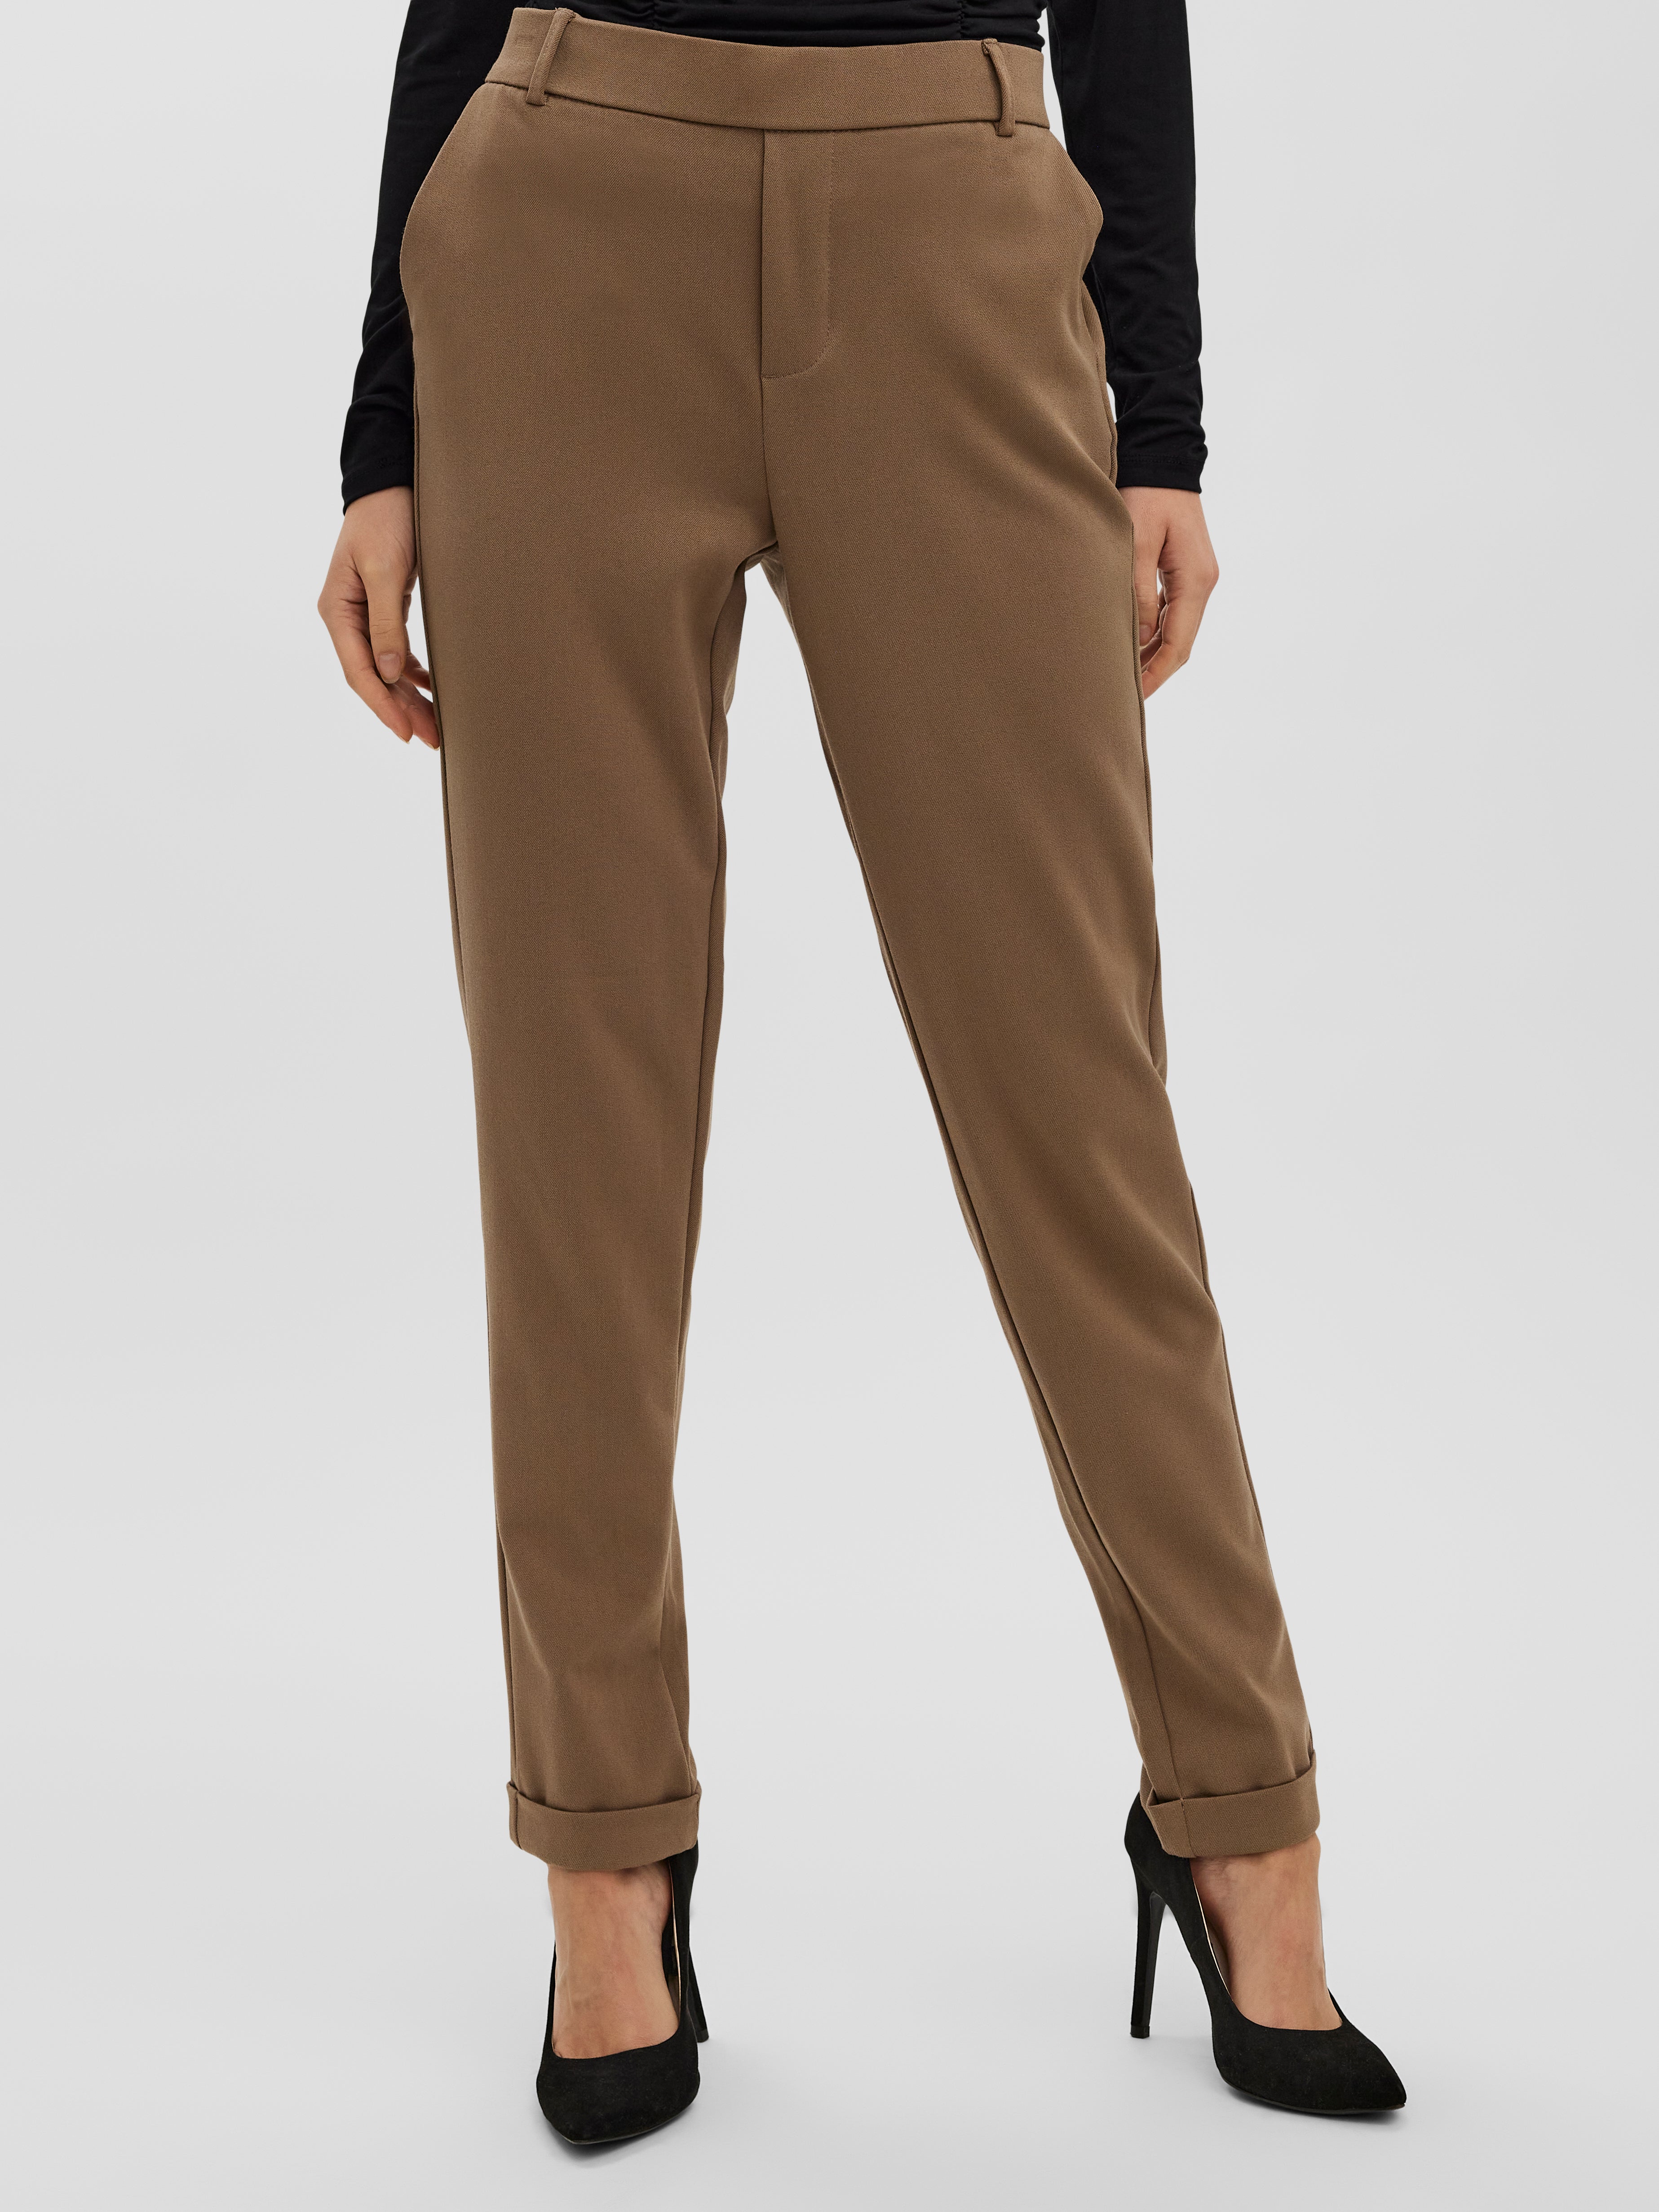 Womens Clothing Trousers Slacks and Chinos Harem pants Blumarine Tan Faux-leather Trousers in Brown 